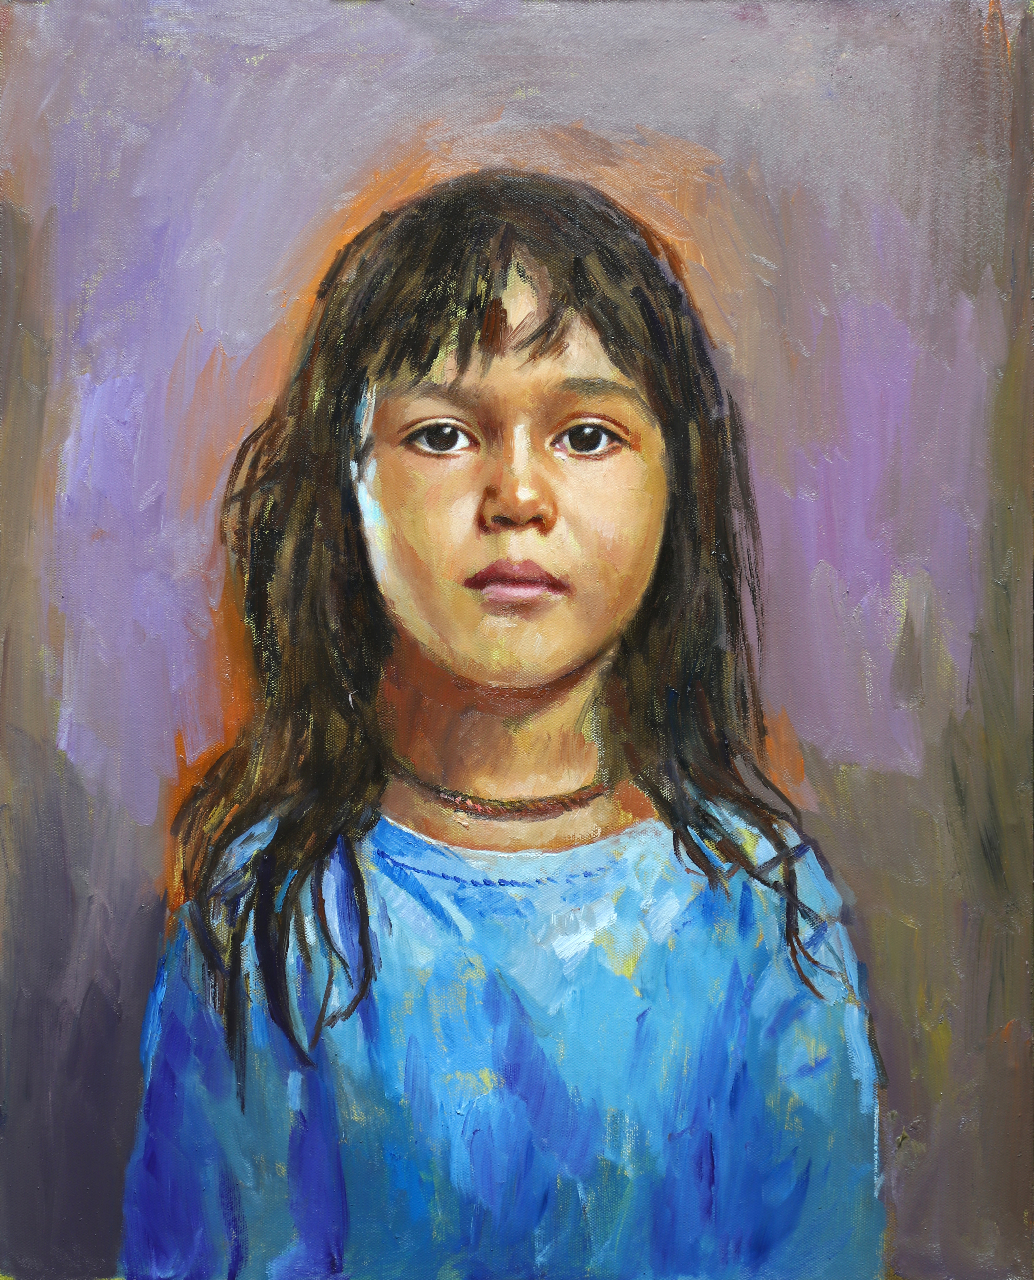 &ldquo;Portrait Painting in Oils of Emilie #6 by Dad&rdquo;